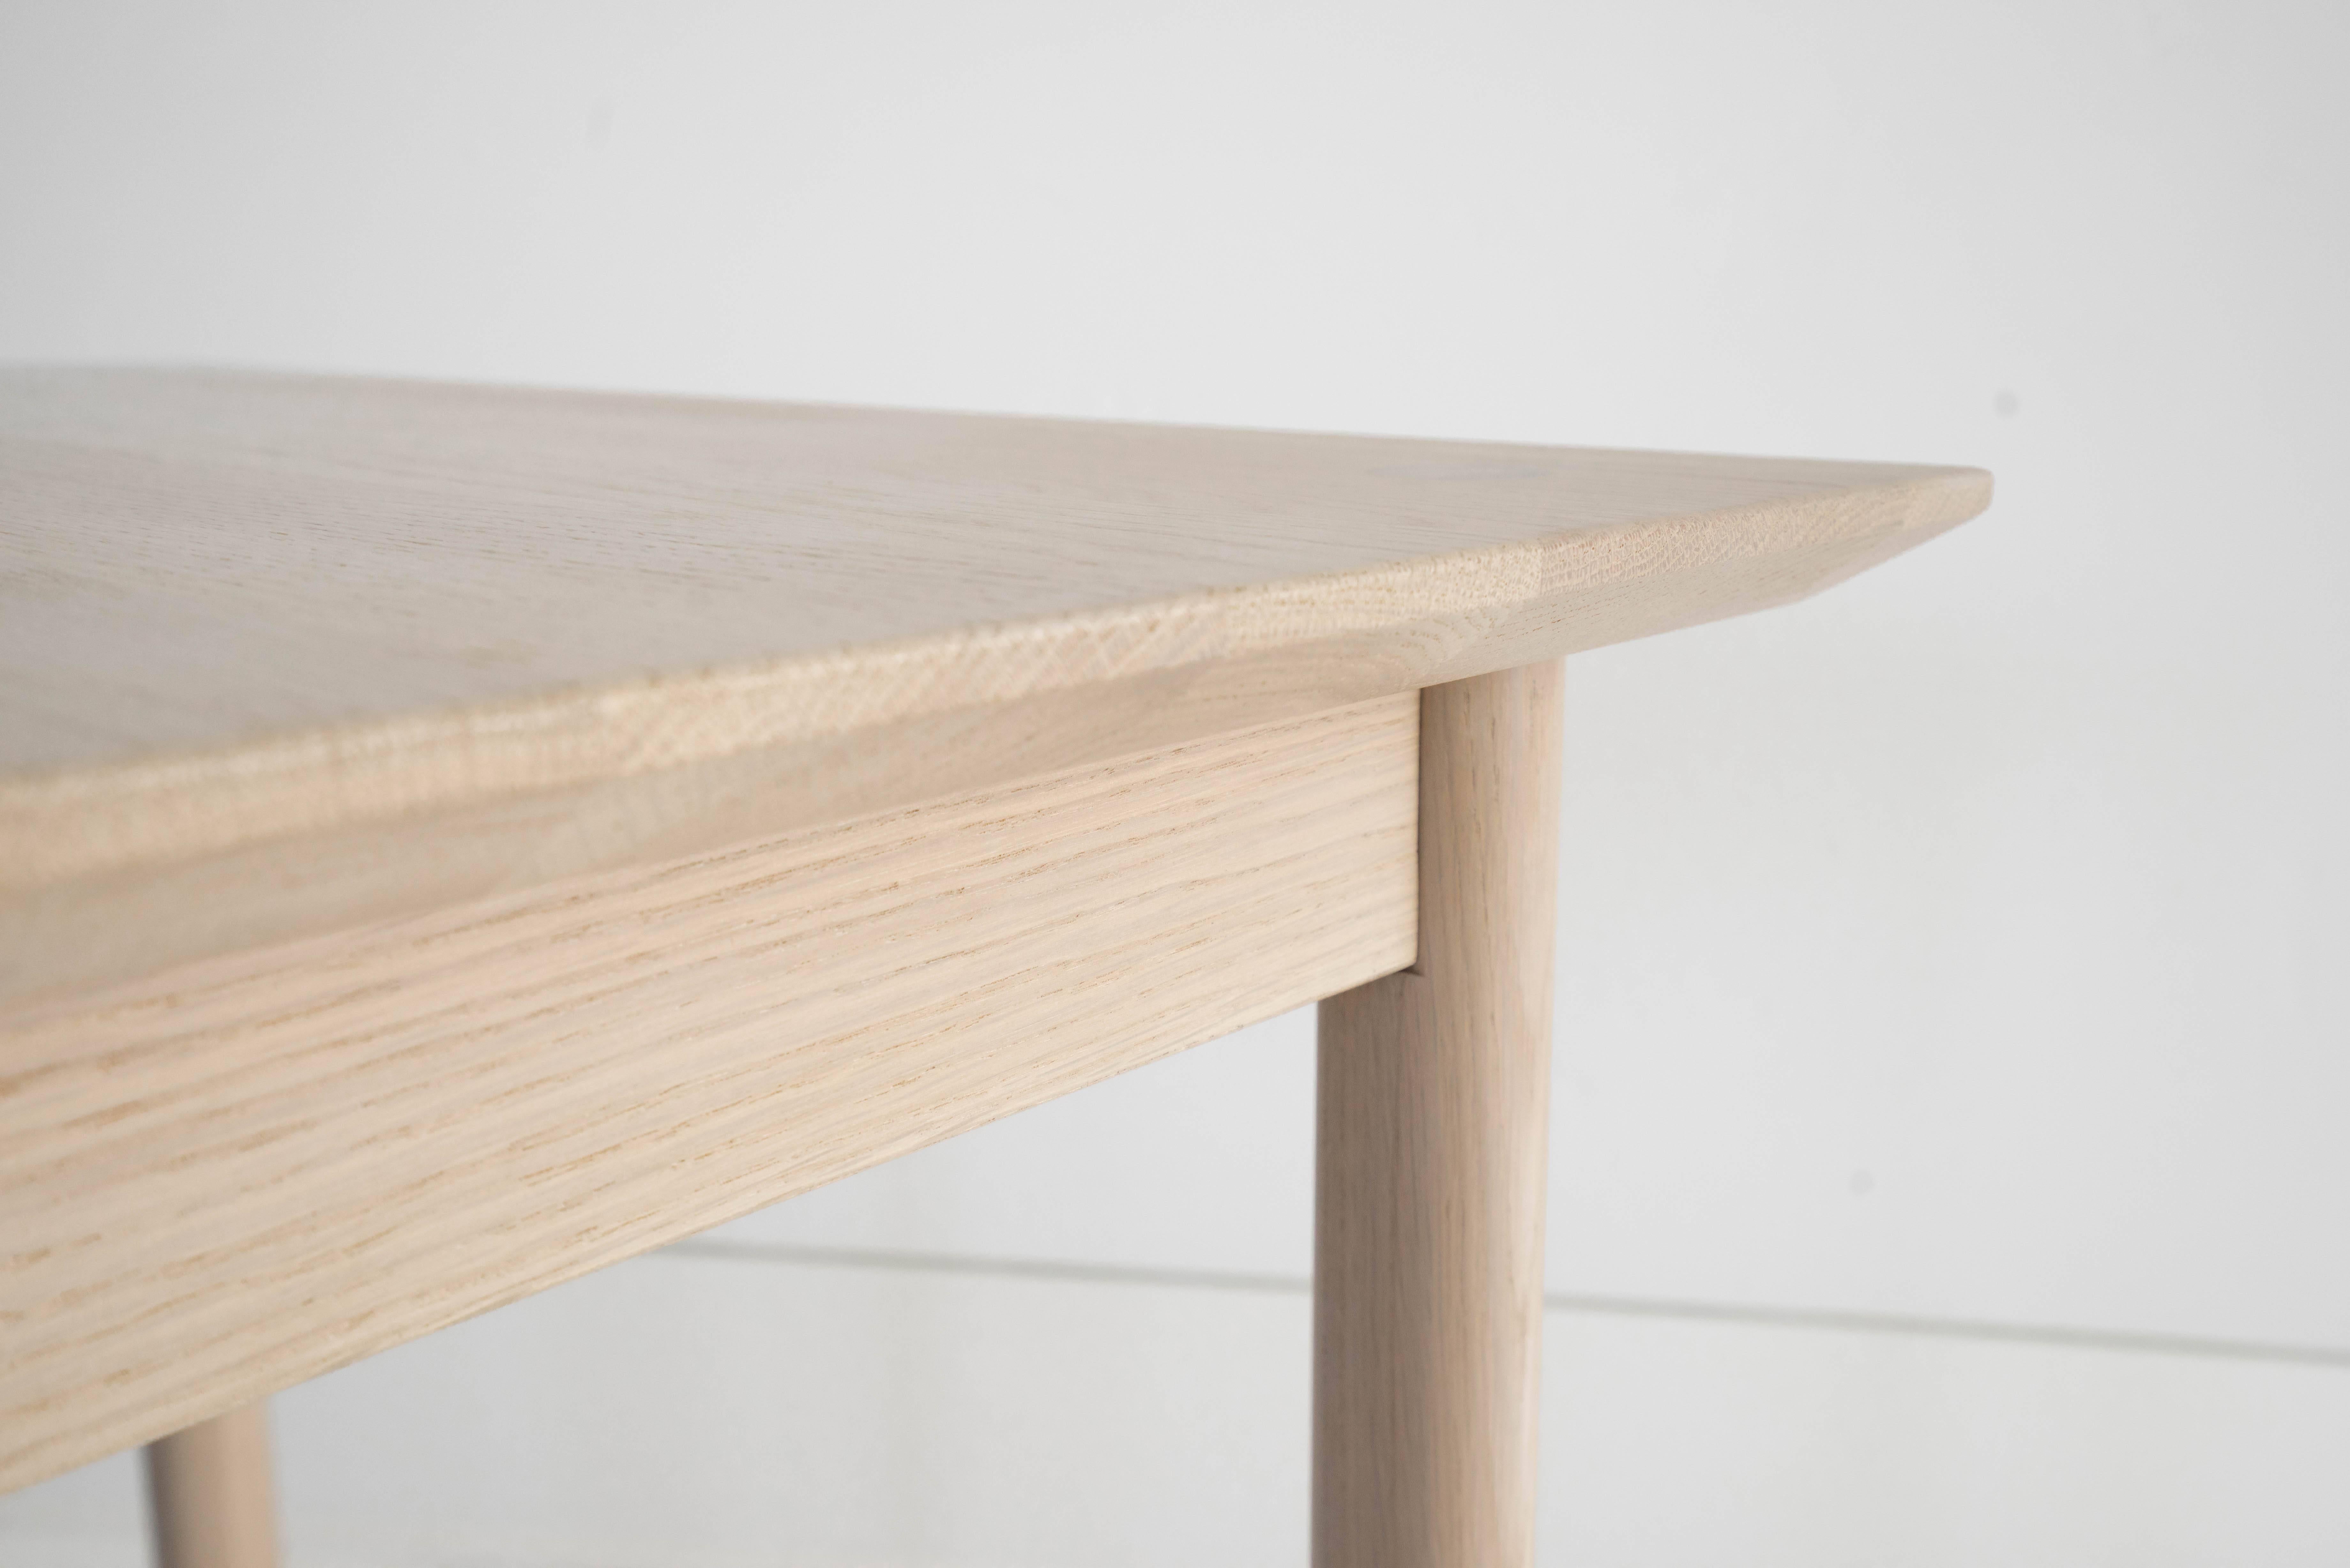 Sun at Six is a contemporary furniture design studio that works with traditional Chinese joinery masters to handcraft our pieces using traditional joinery. Handcrafted using traditional joinery. The coast table can be used as a desk or dining table.